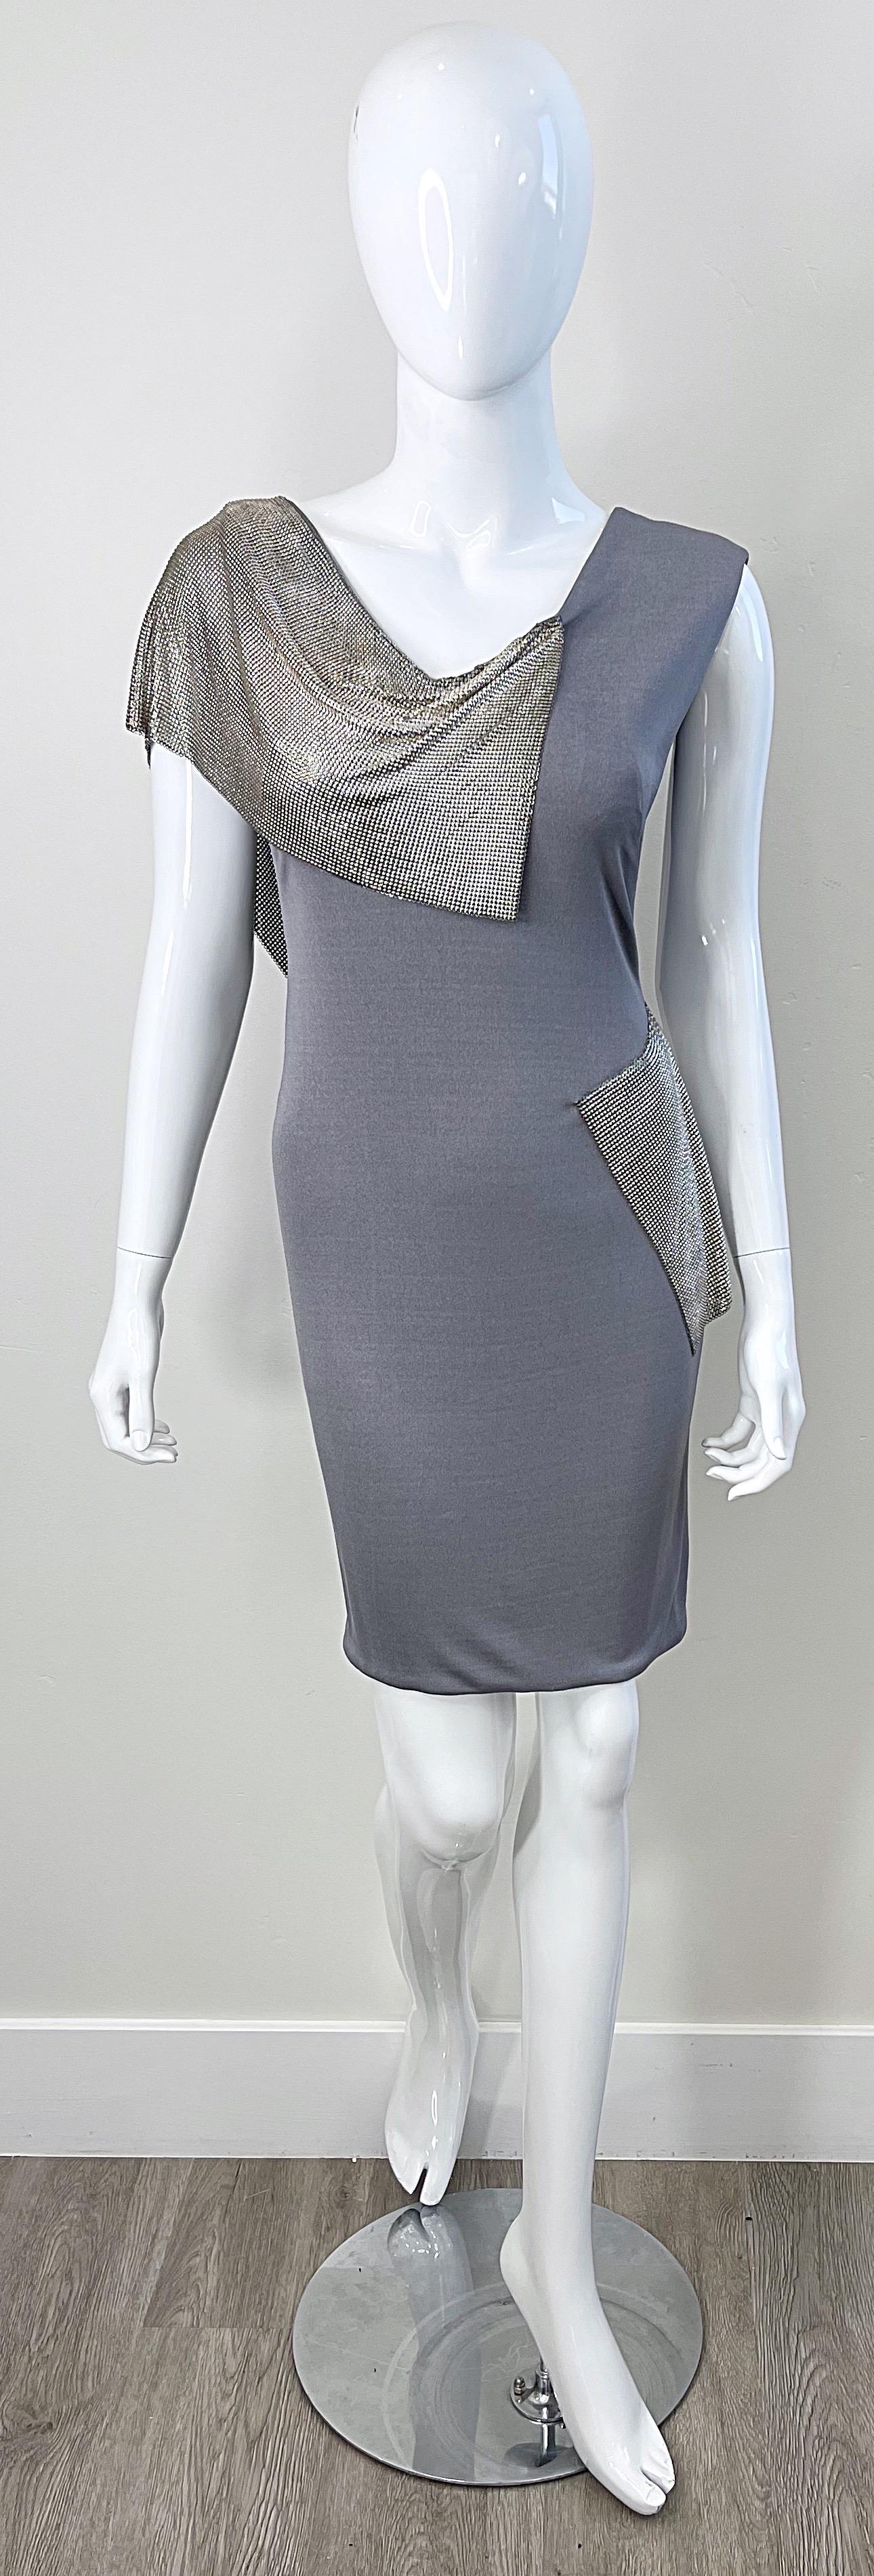 CD Greene 2000s Grey Silver Chainmail Cut-Out Silk Jersey Y2K Vintage Dress For Sale 10